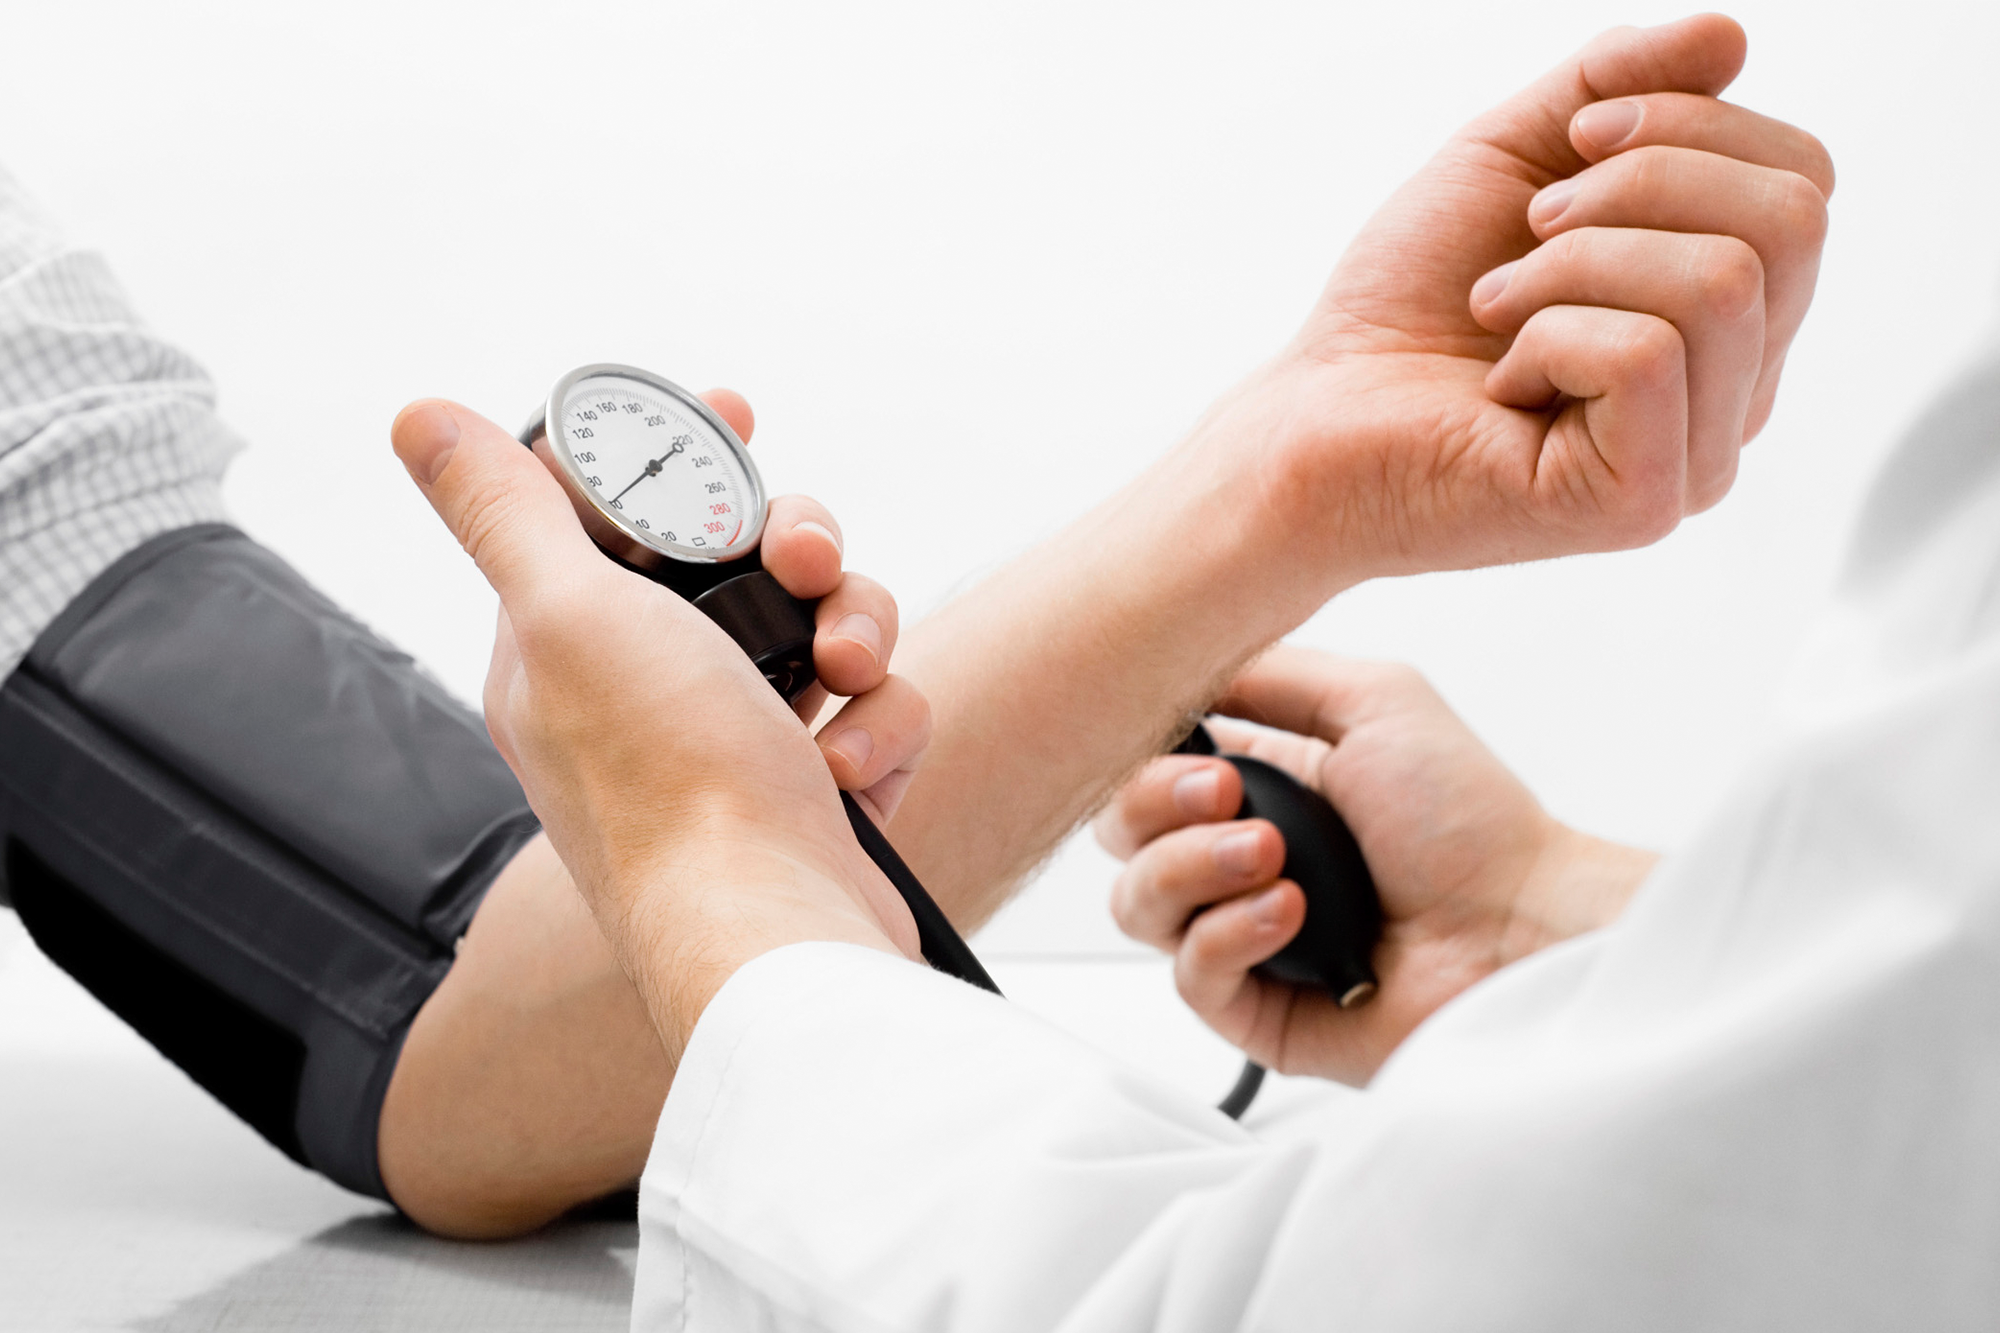 Drive away Hypertension with these tips